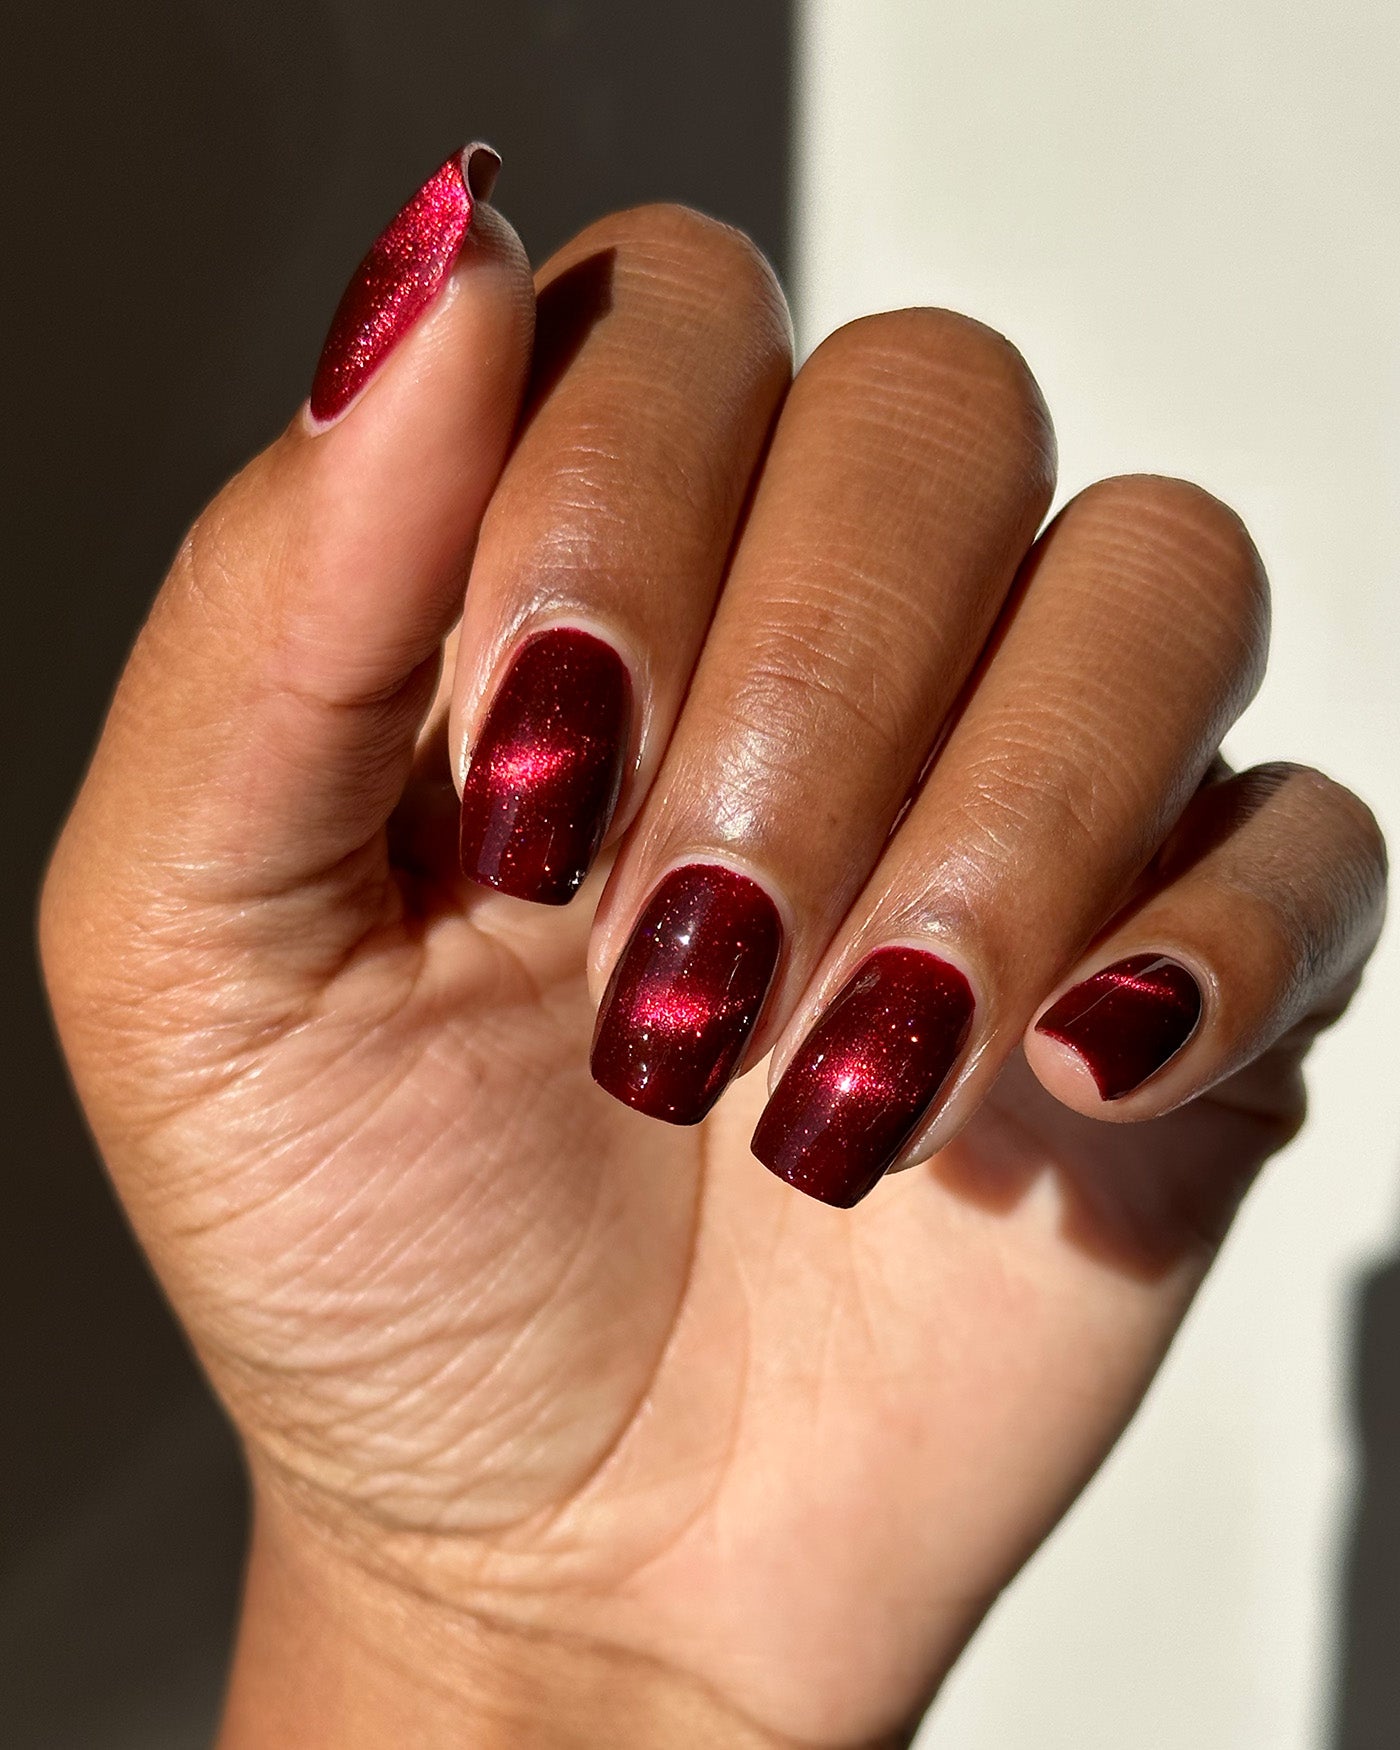 BRING THE SHORT NAILS SHAPE TO ANOTHER LEVEL MANICURE